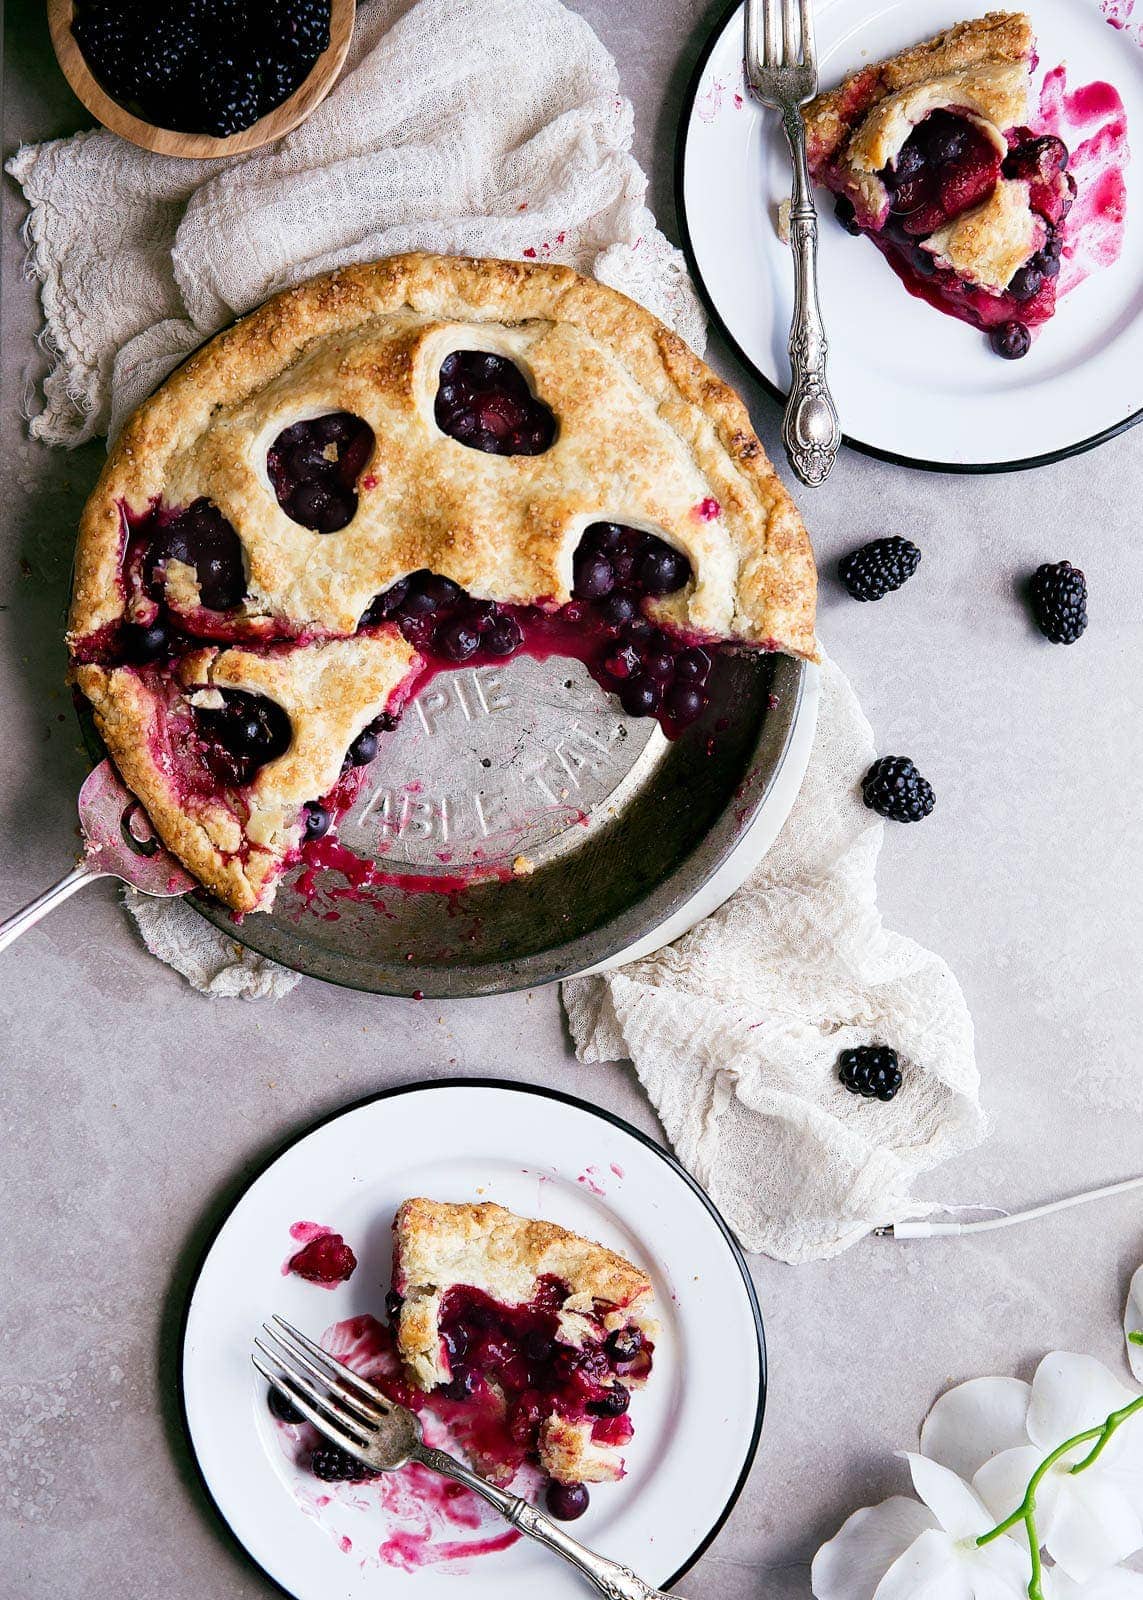 The prettiest pie there ever was: this quadruple berry bumbleberry pie.